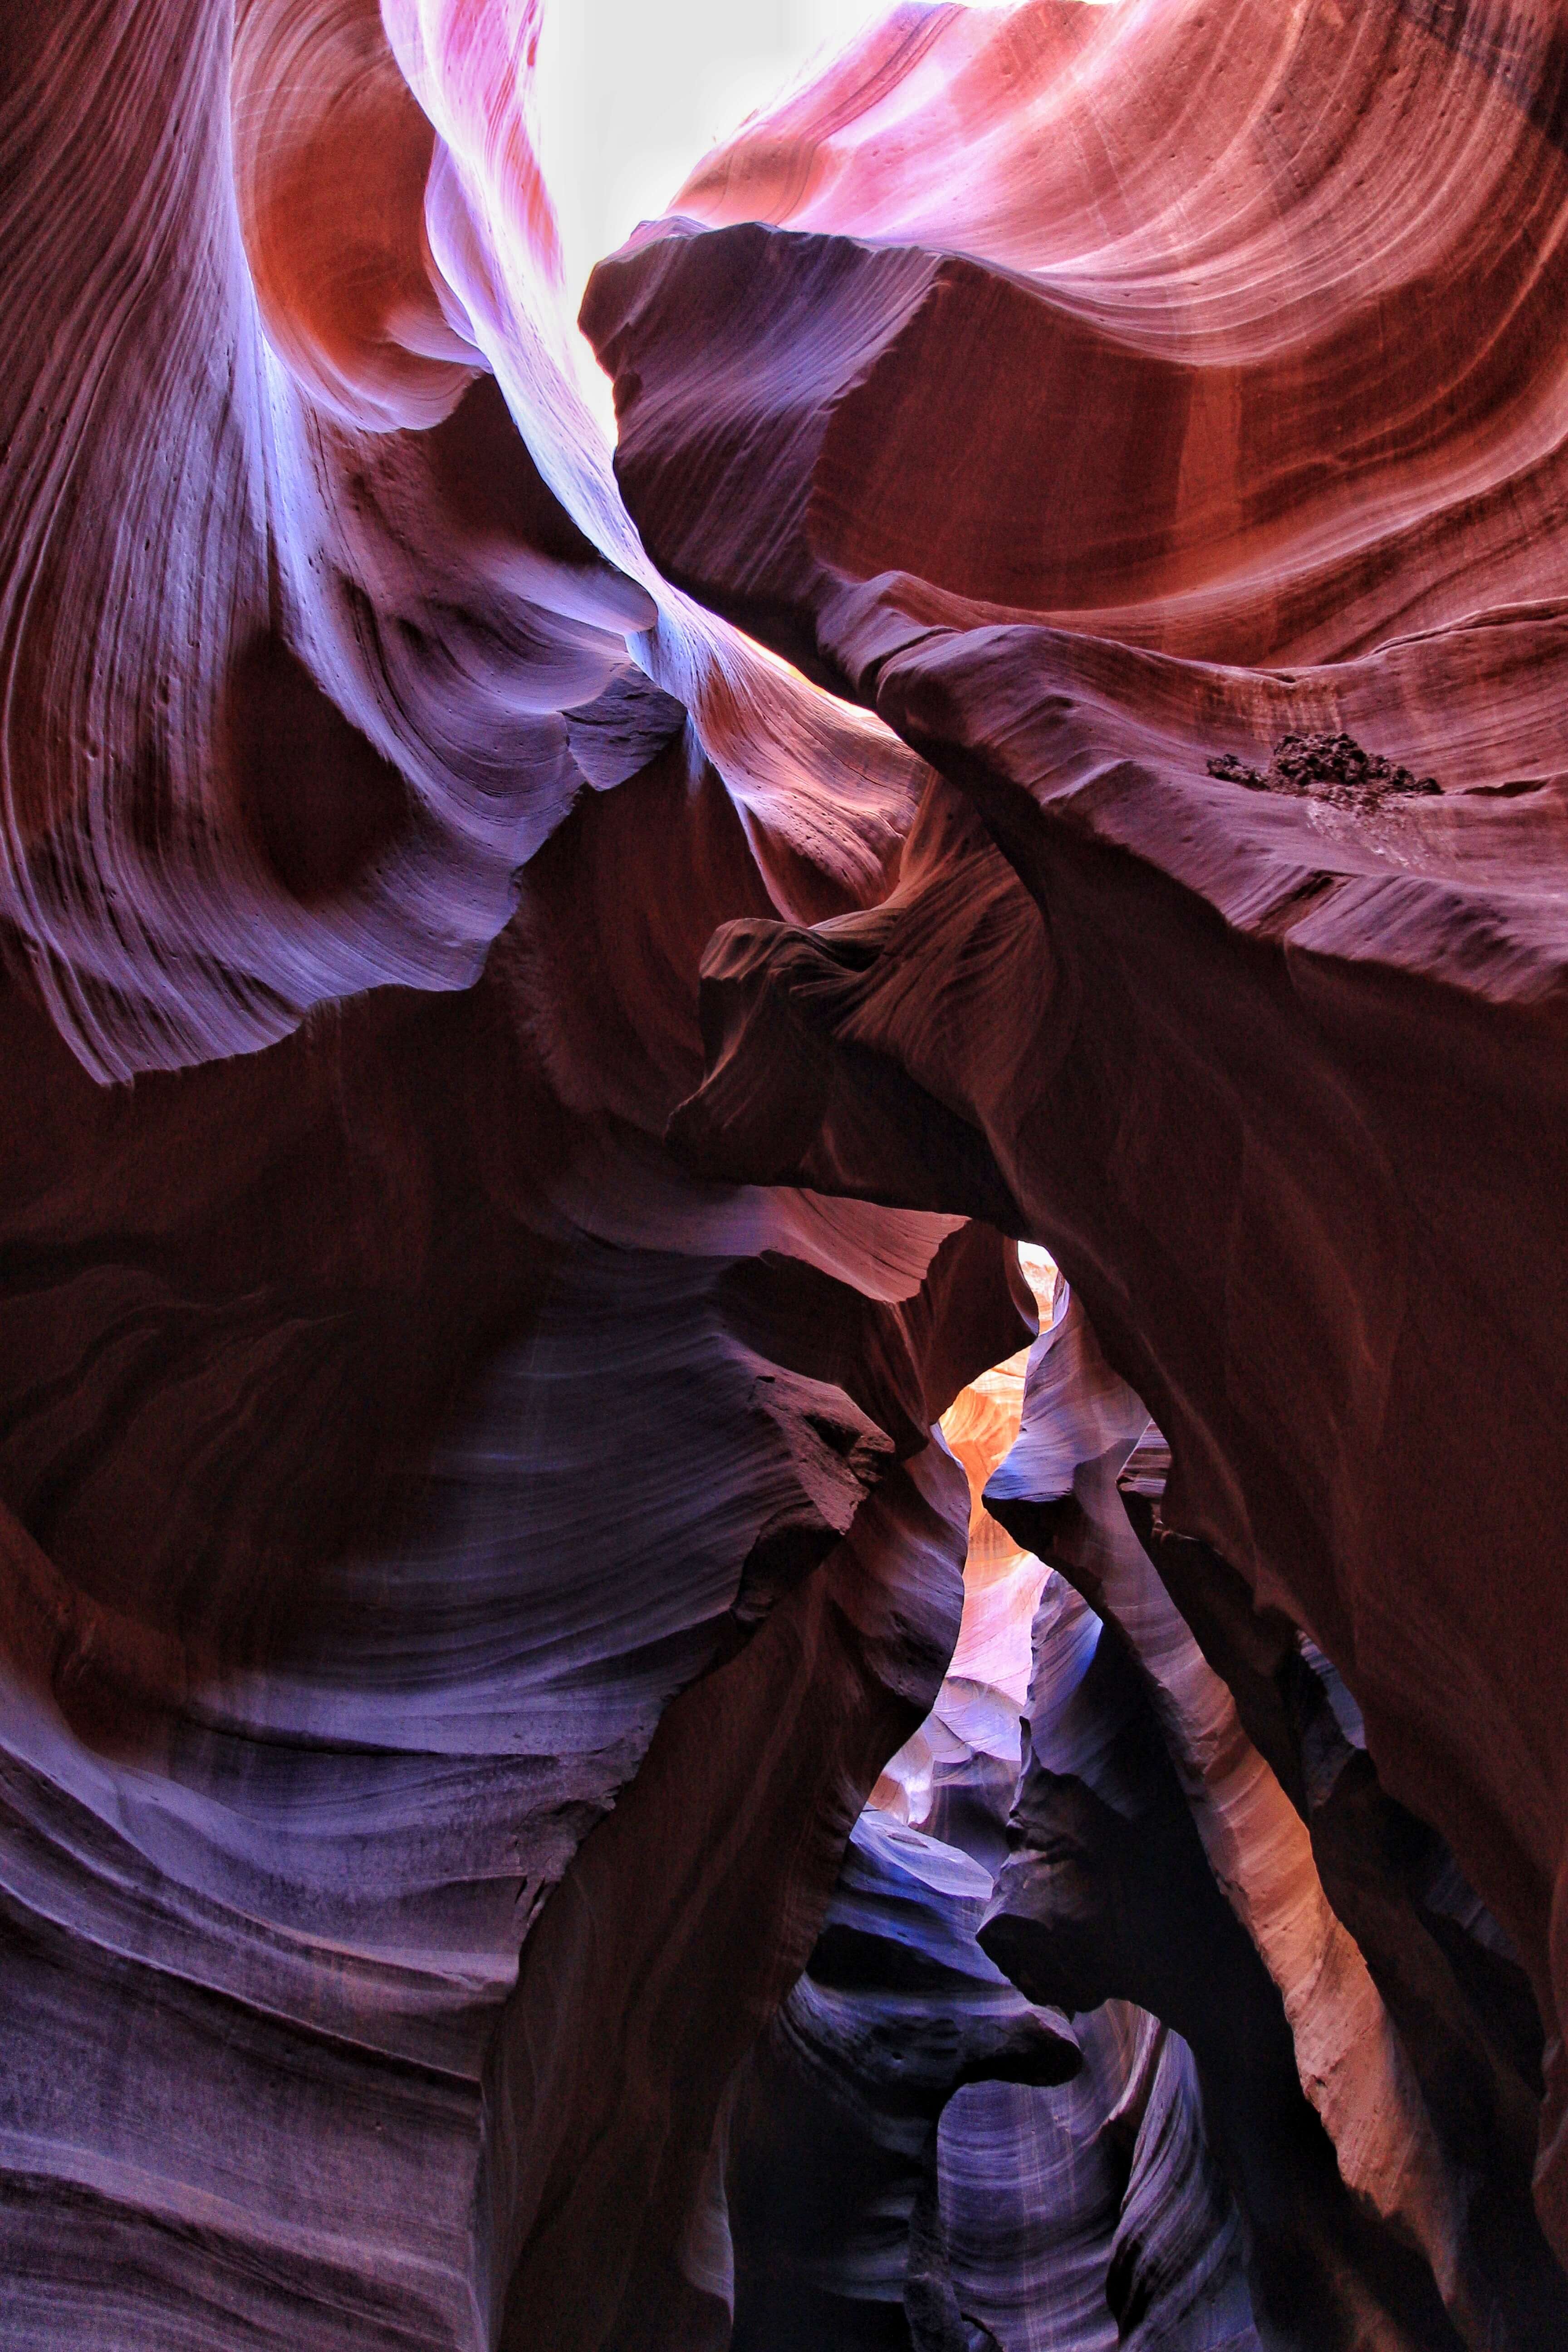 detailed rock formation with horizontal lines, with purple, red, and auburn hues. - iPhone camera antelope canyon